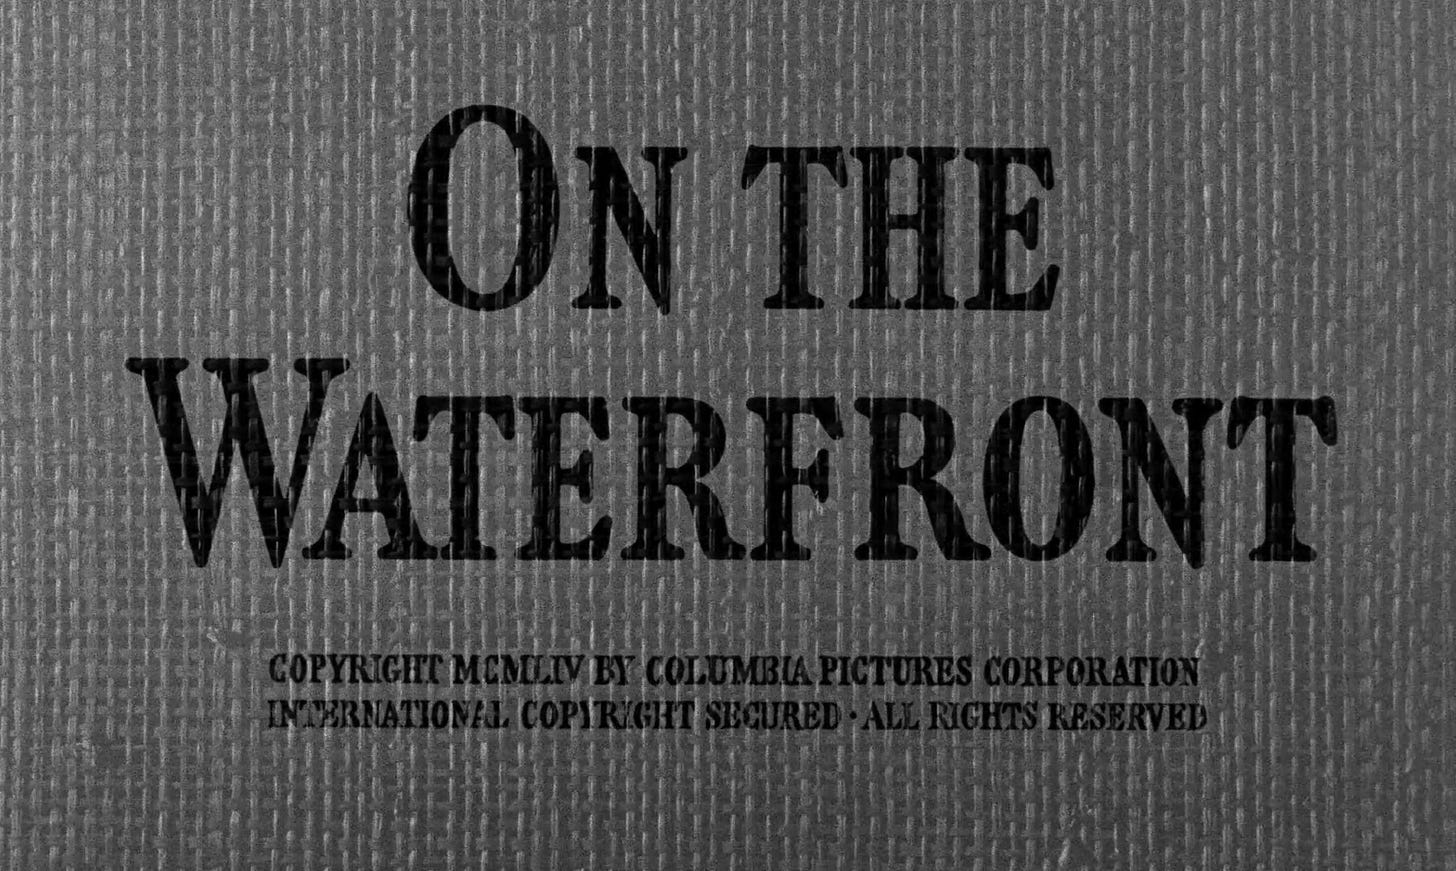 The opening credits from the 1954 film On the Waterfronts, set over a burlap sack of the kind in which goods would be shipped